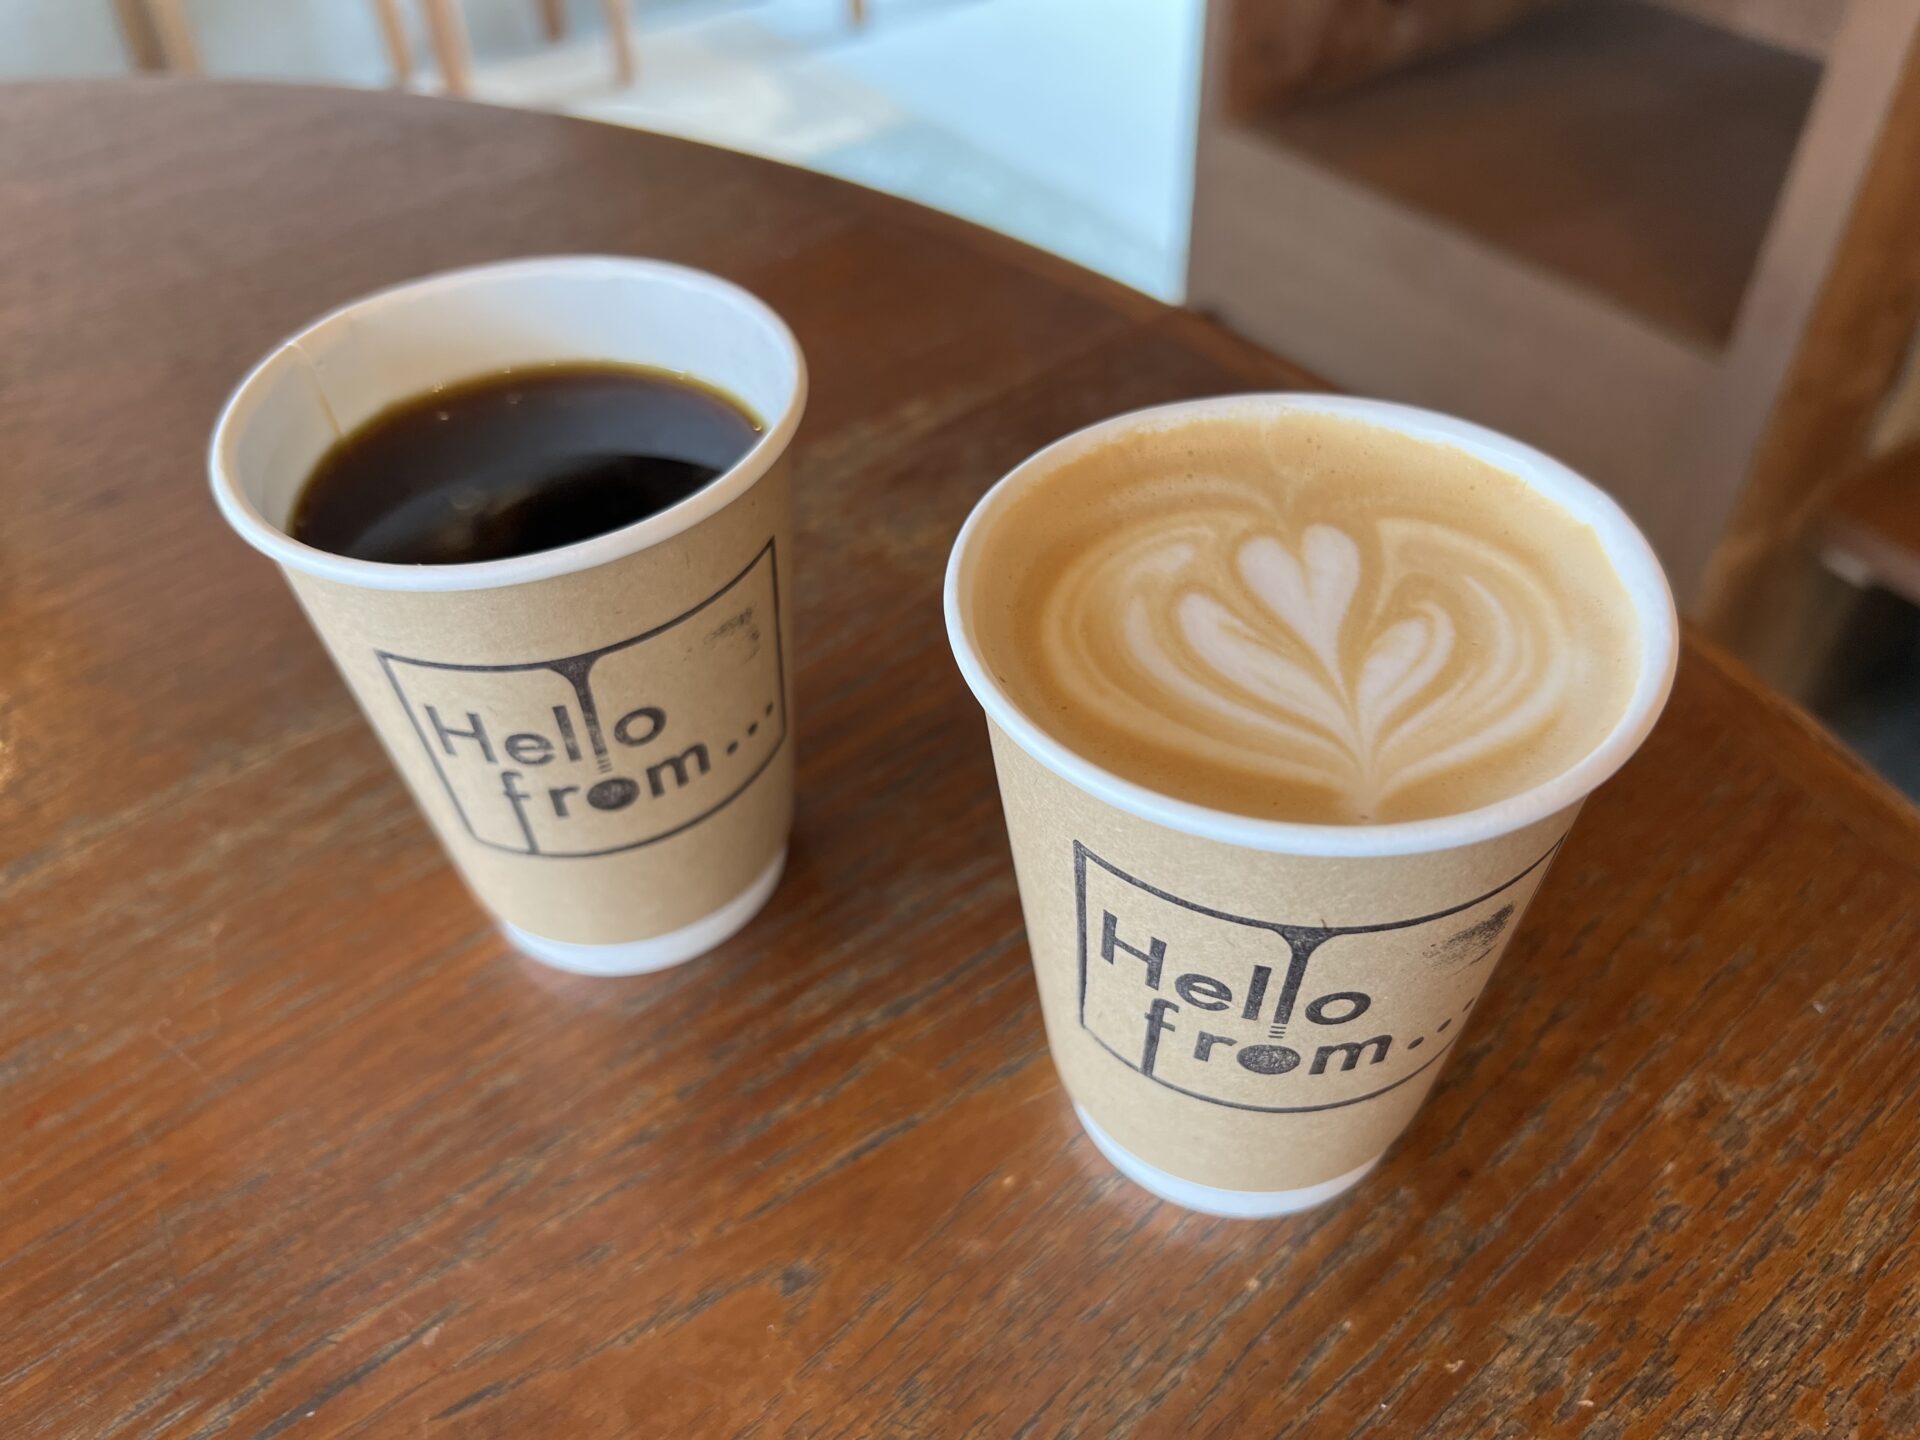 Hello from Coffee ドリンク